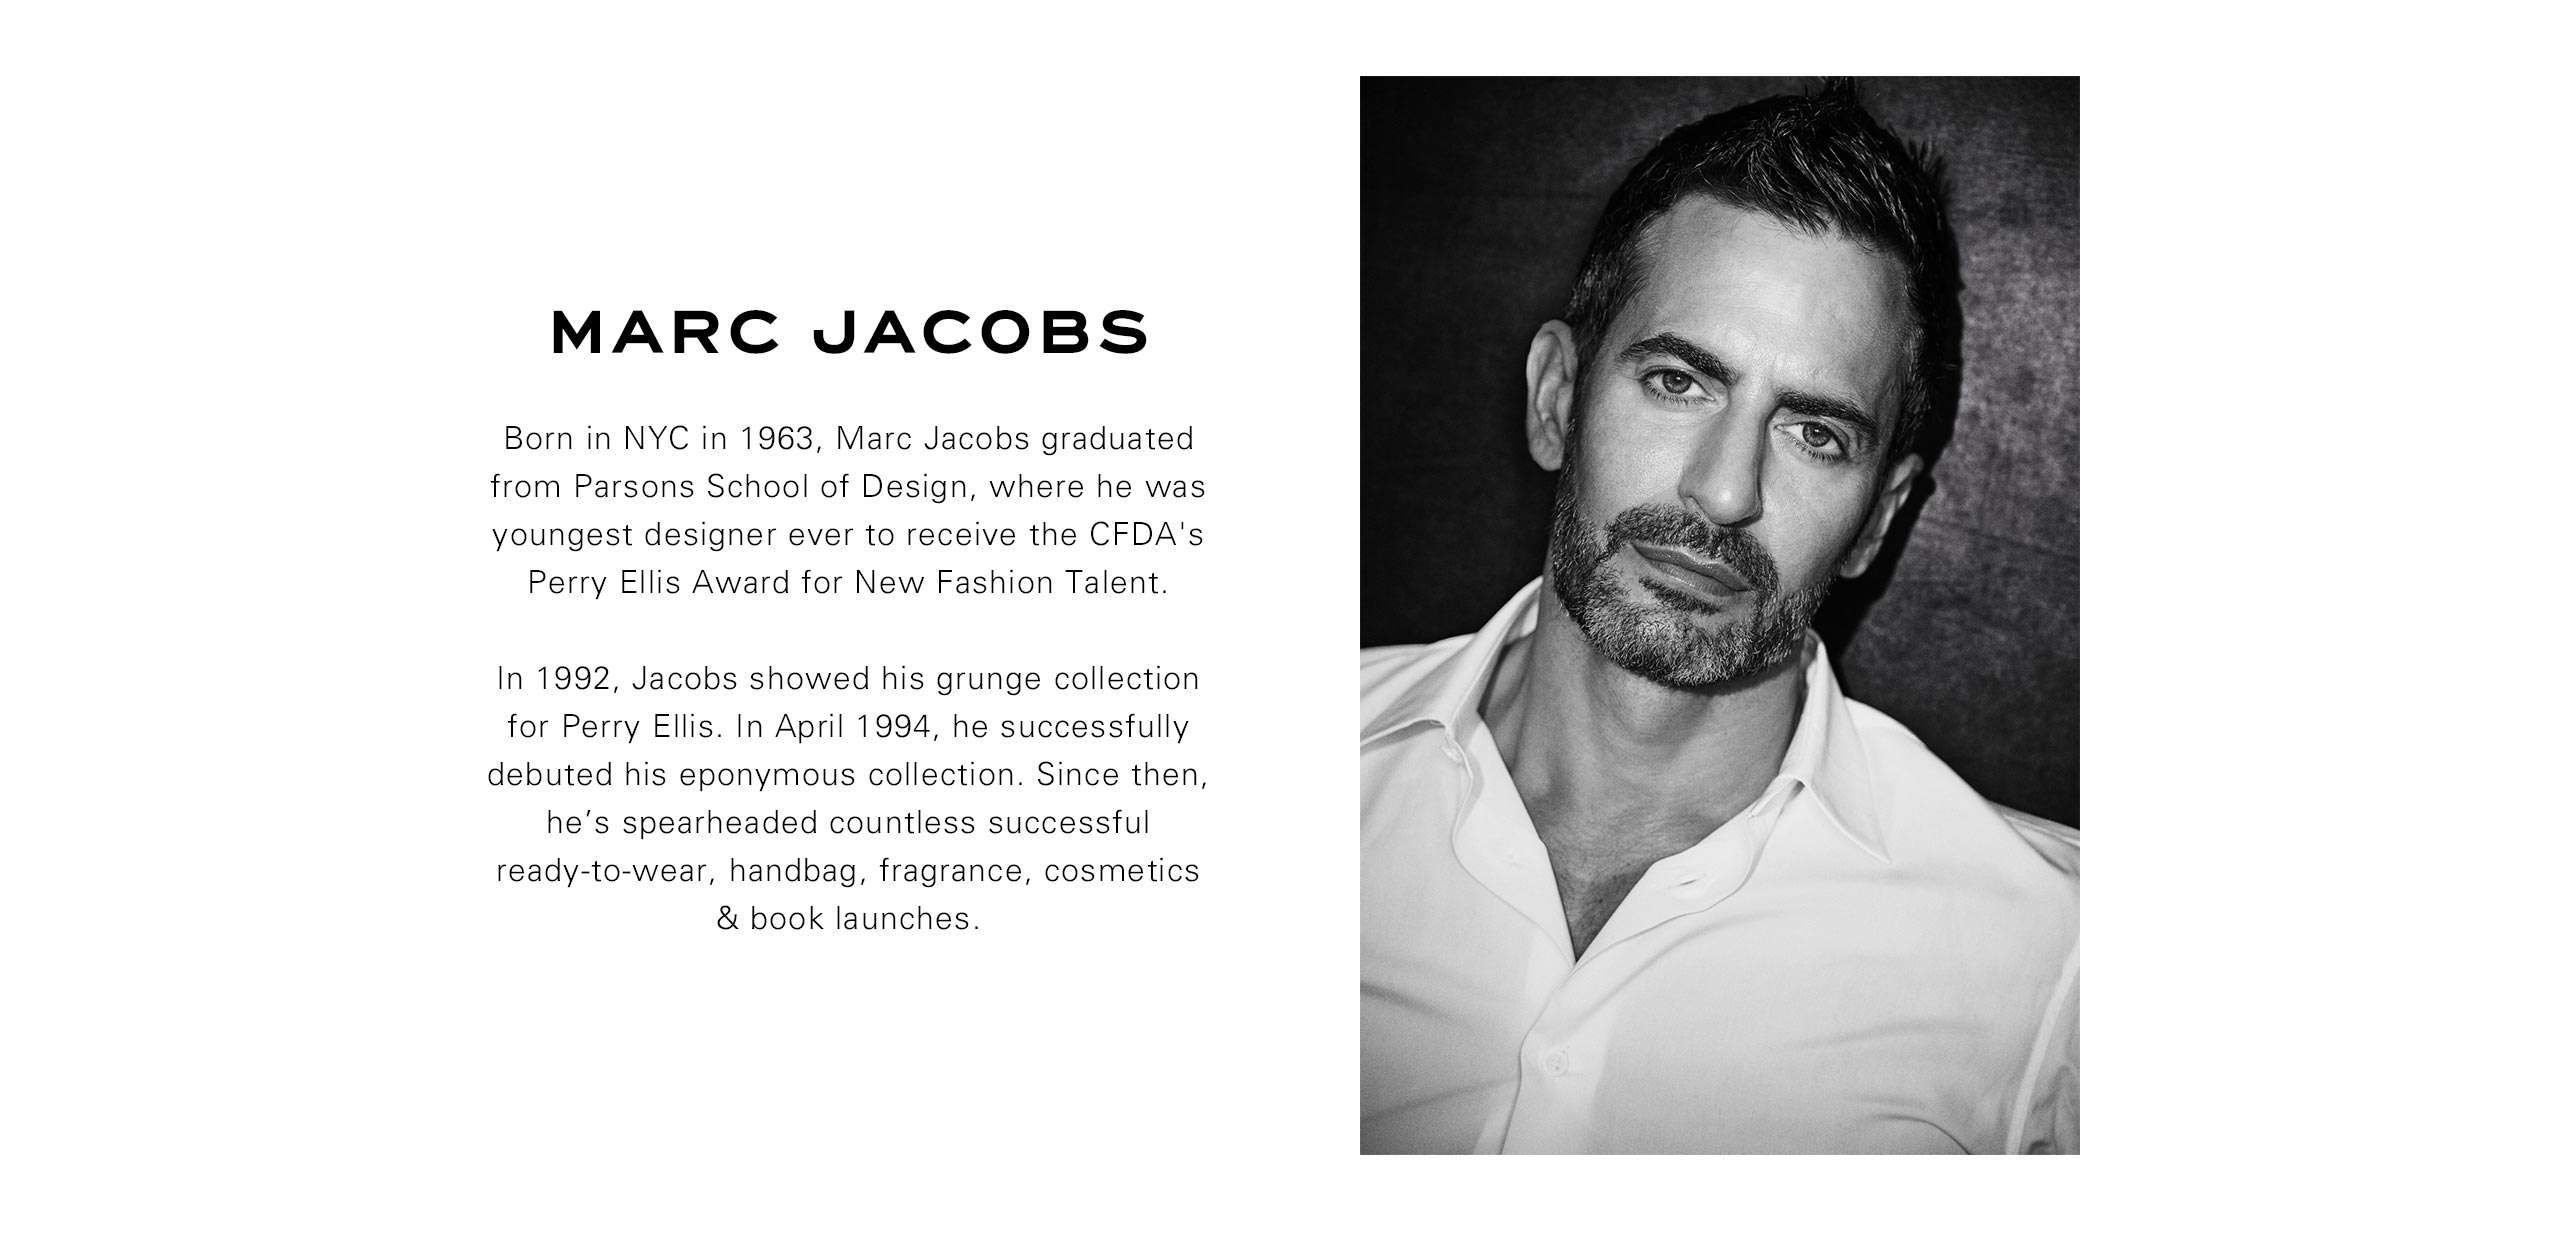 Where's Marc Jacobs?